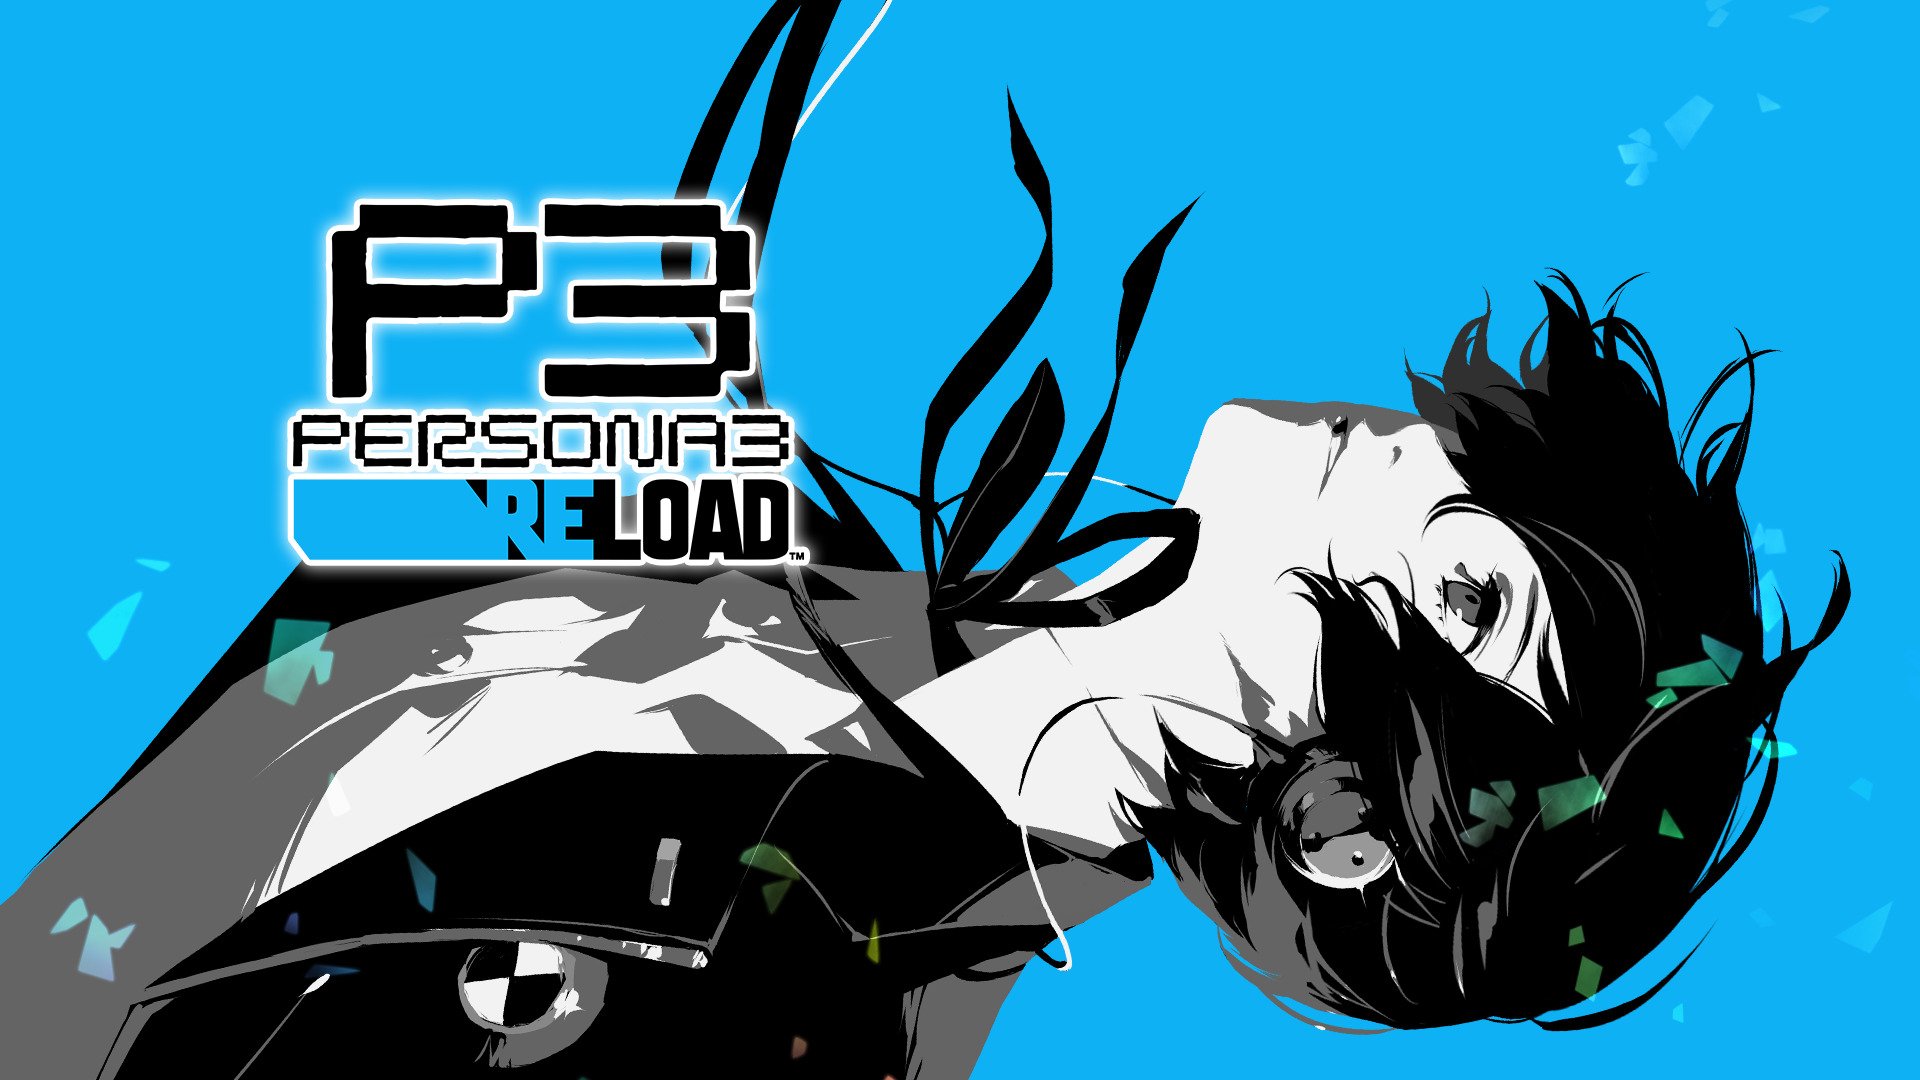 Persona 3 Reload soundtracks are now available on streaming services